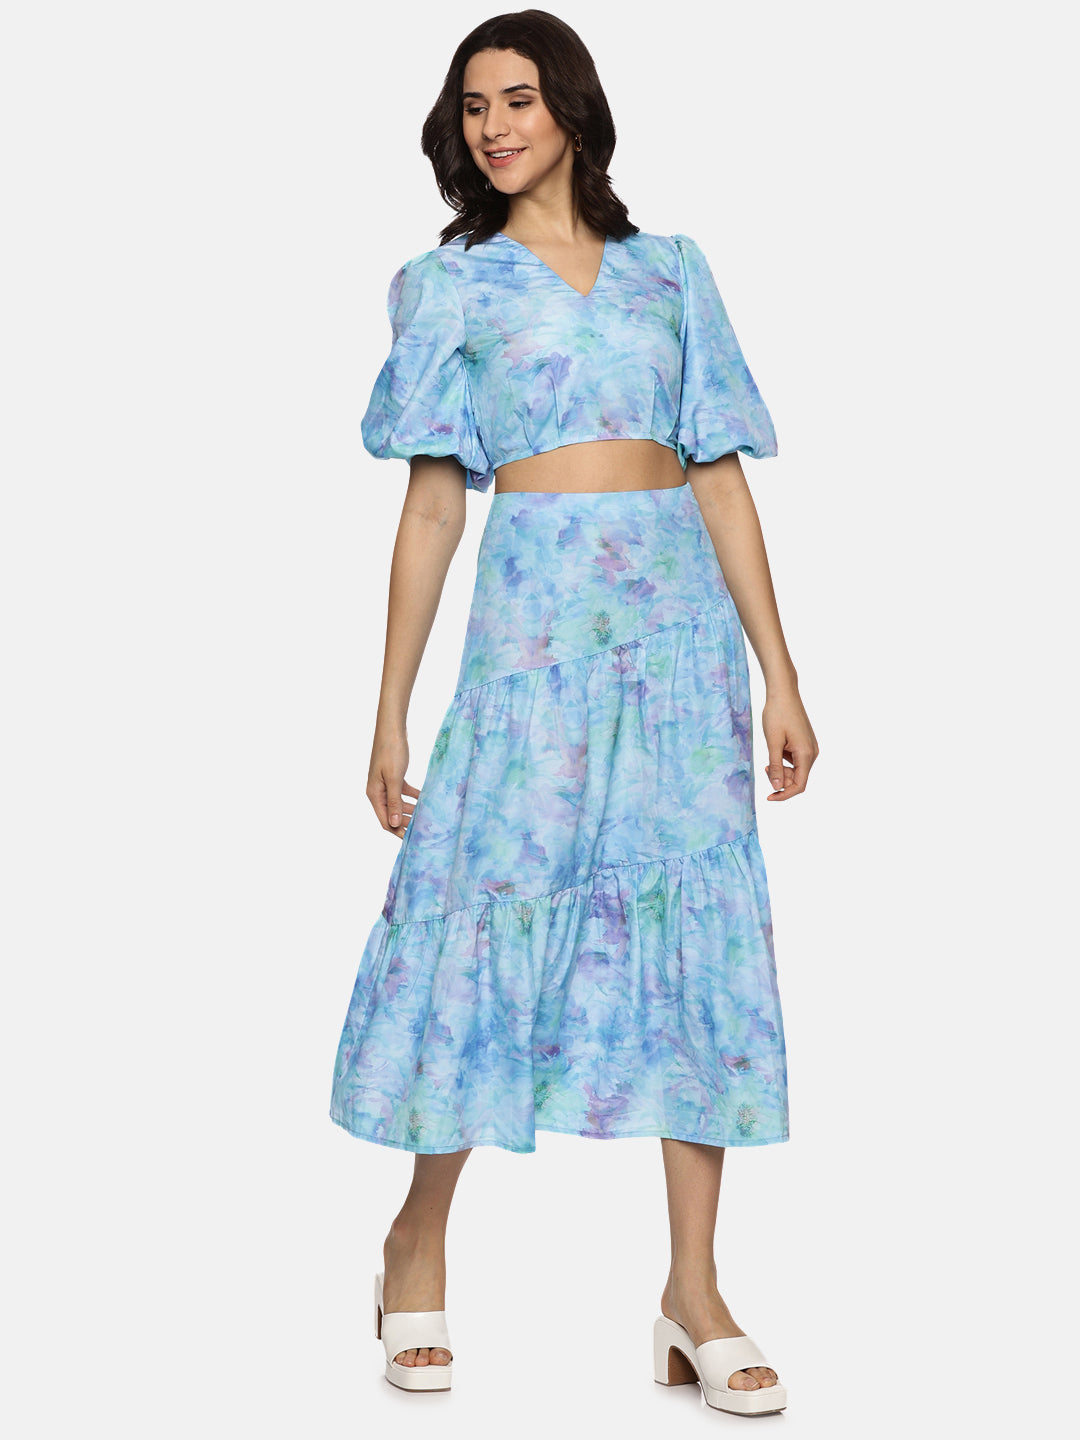 IS.U Floral Blue Cut And Sew Midaxi Co-ord Set